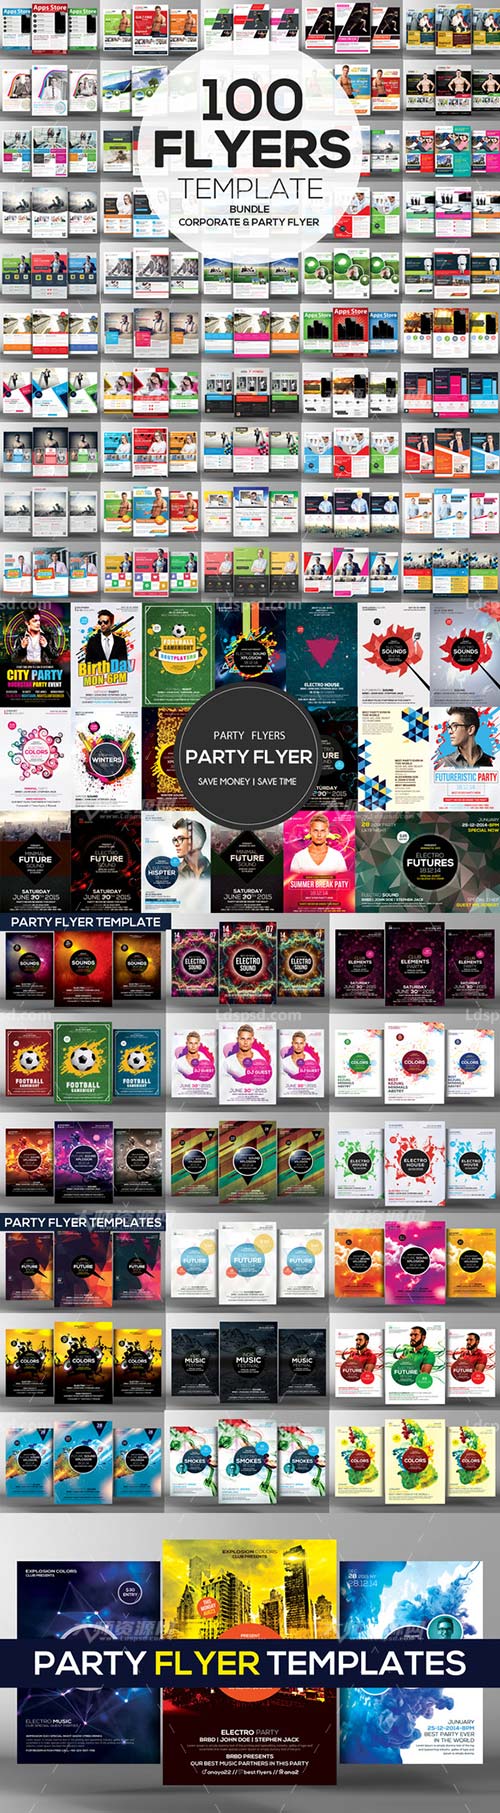 100 Corporate and Party Flyers Psd,100个企业和派对传单模板